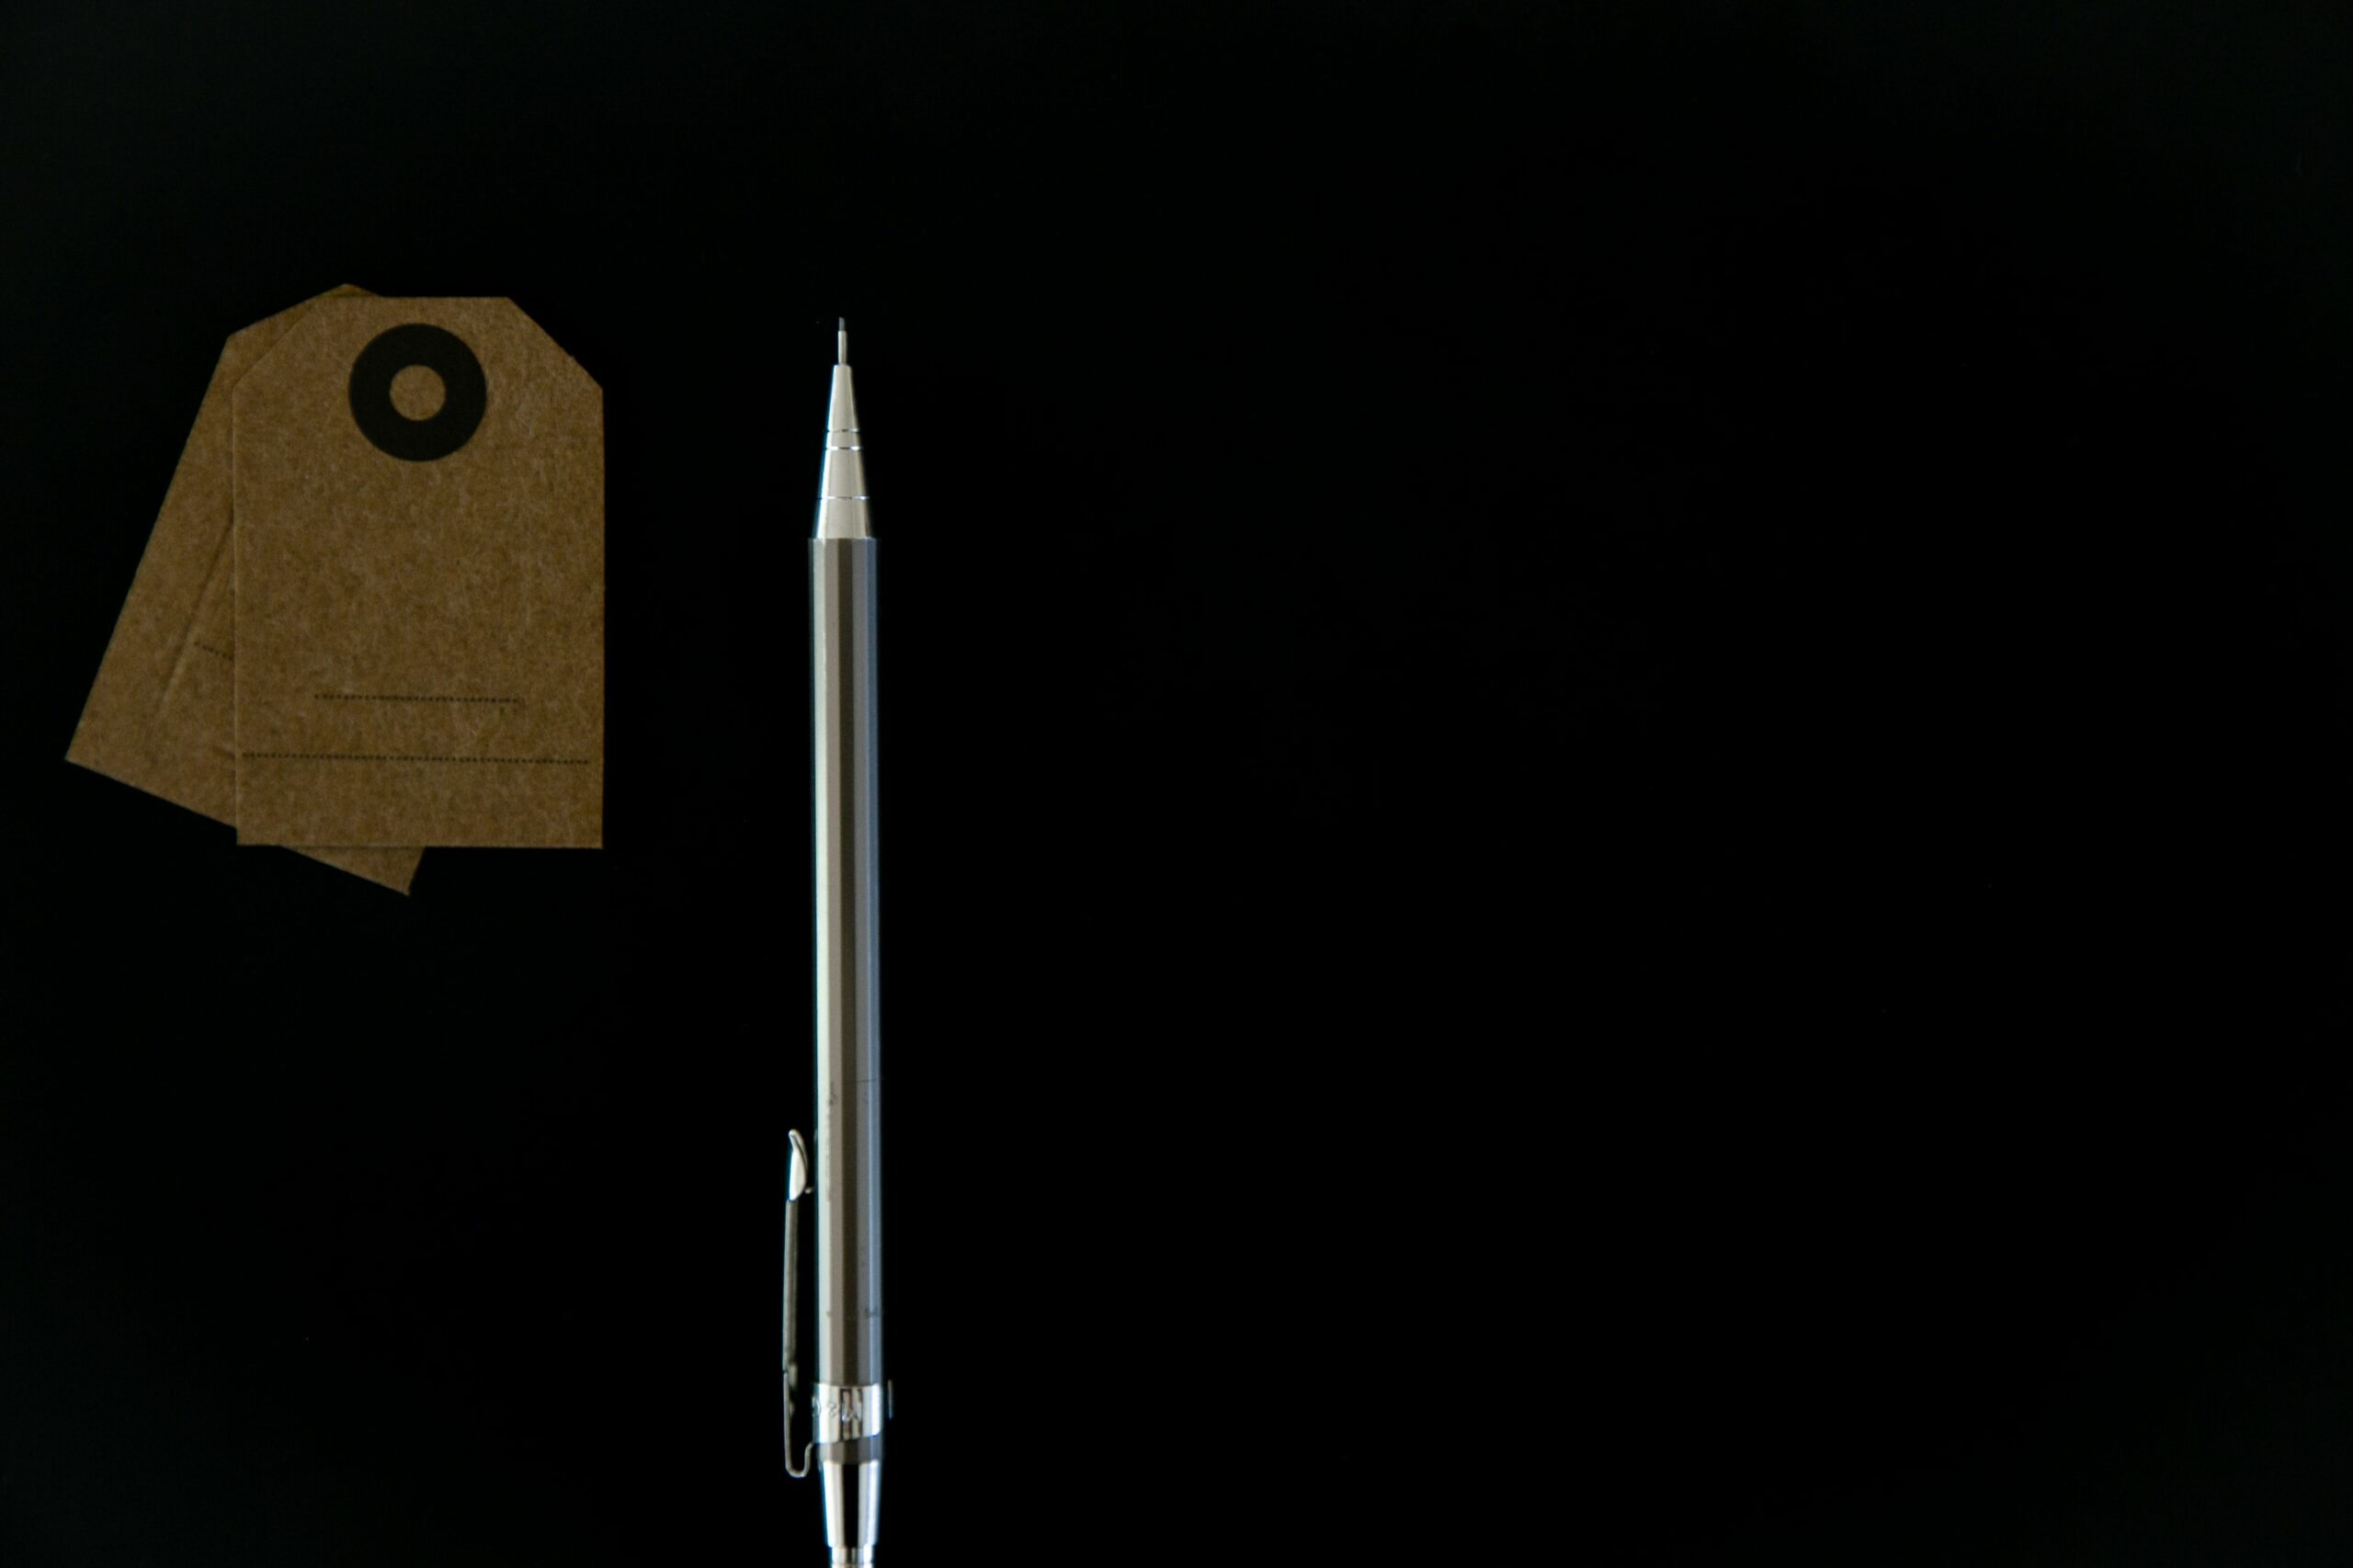 0. 2 mm - 0. 4 mm: the thinnest pencil leads